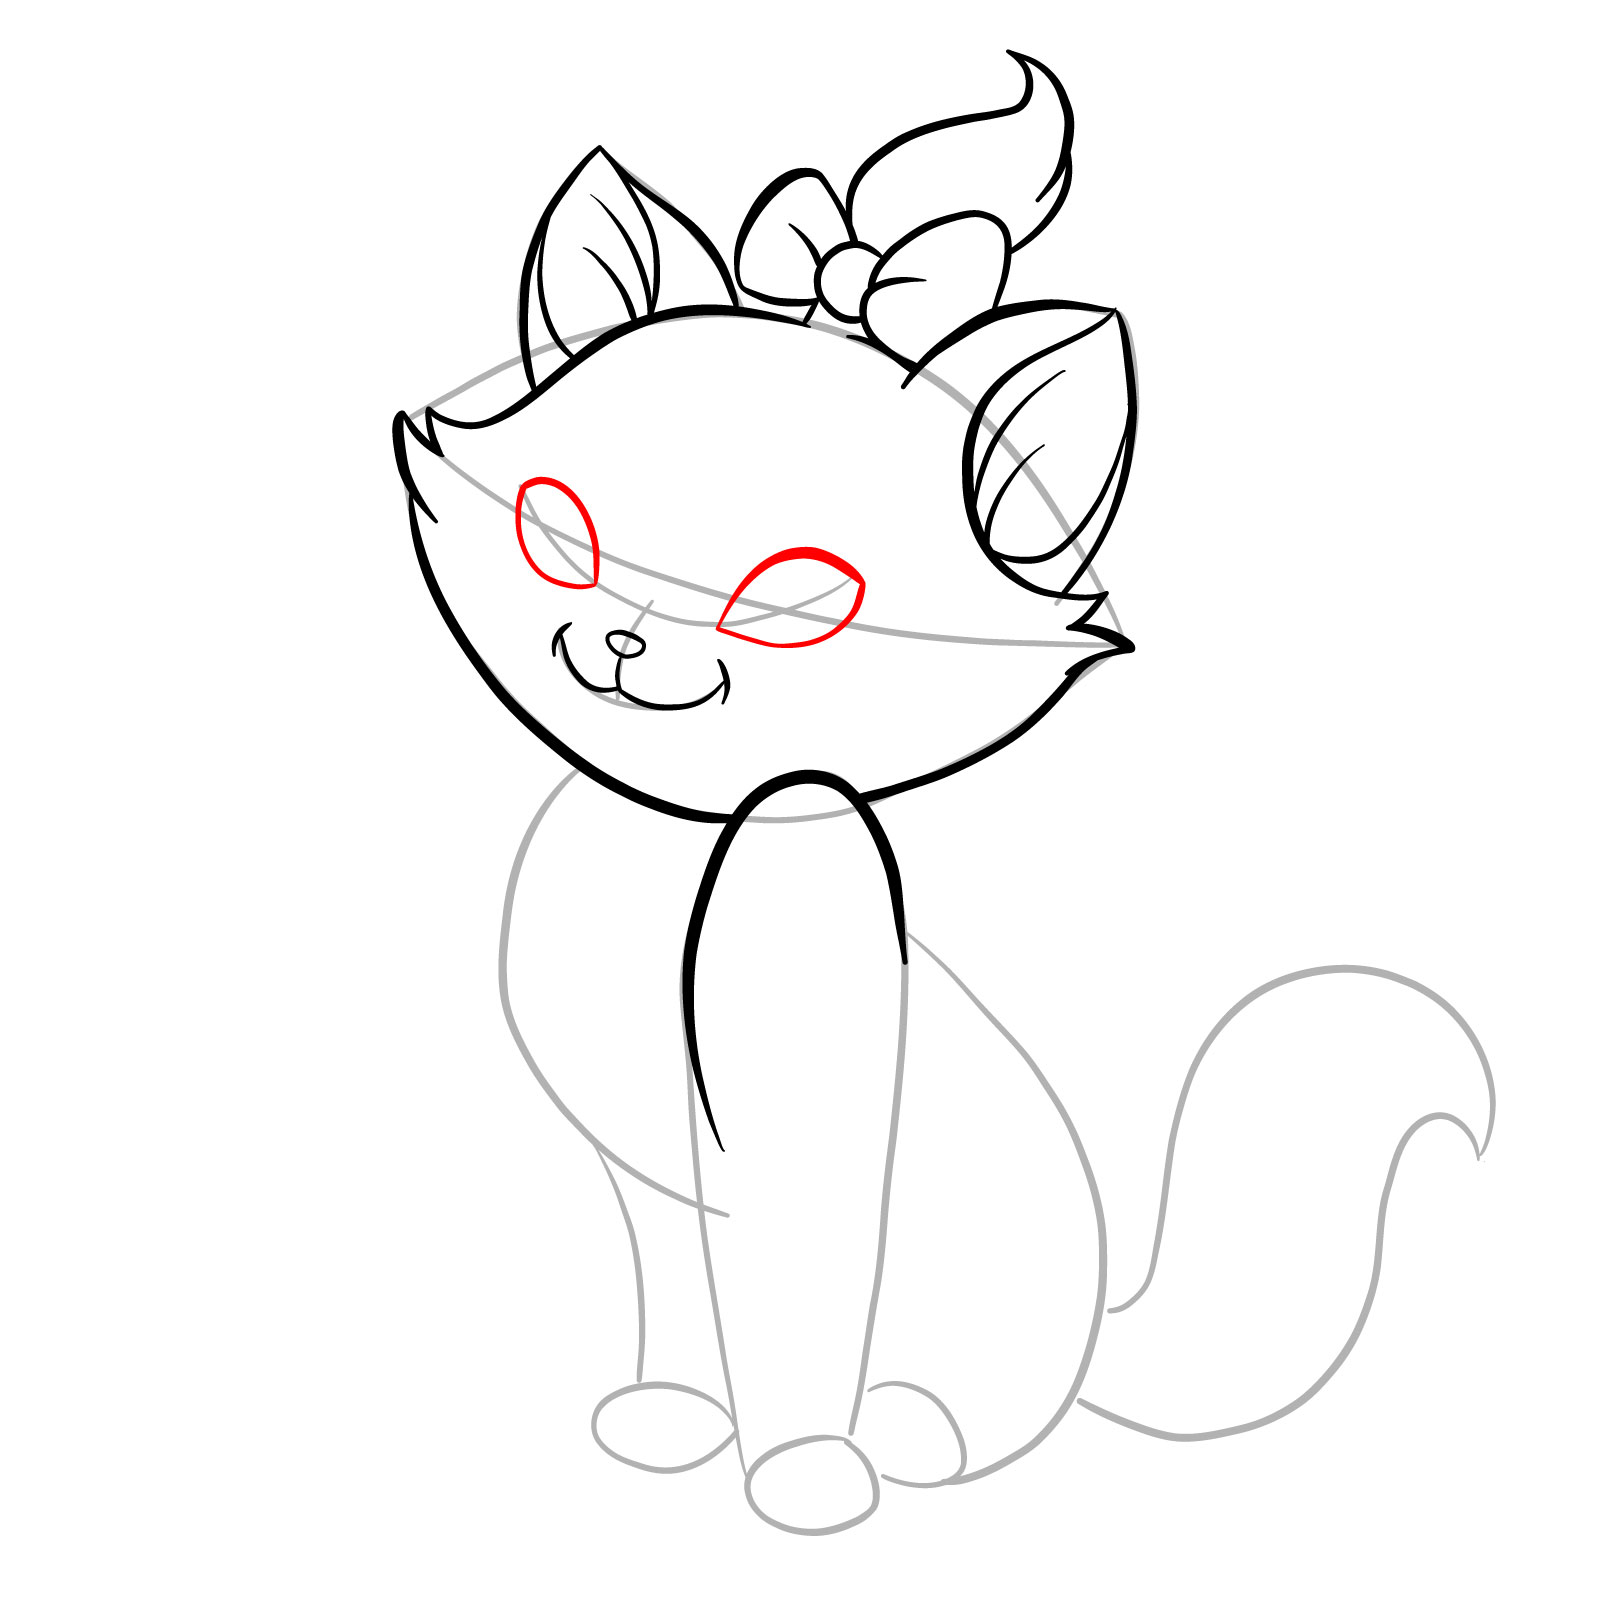 How to draw Marie from The Aristocats - step 14